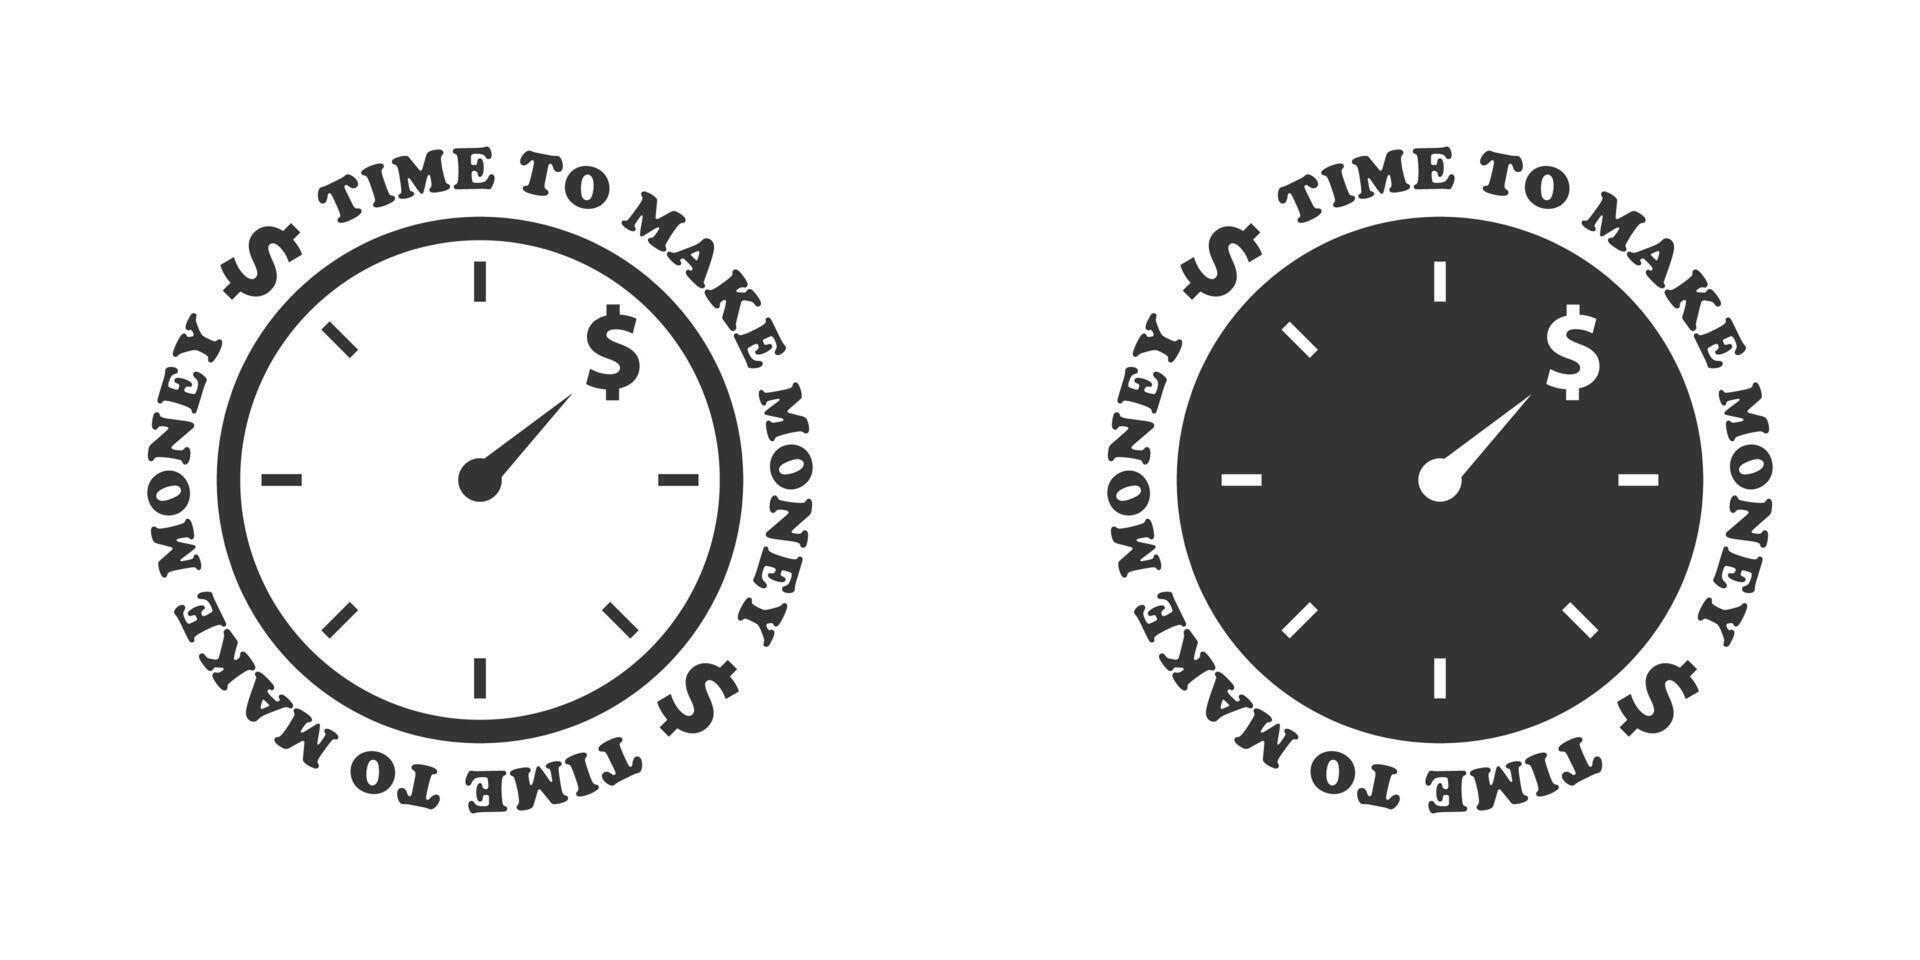 Time to make money icon. Clock face with dollar sign and text around. Vector illustration.